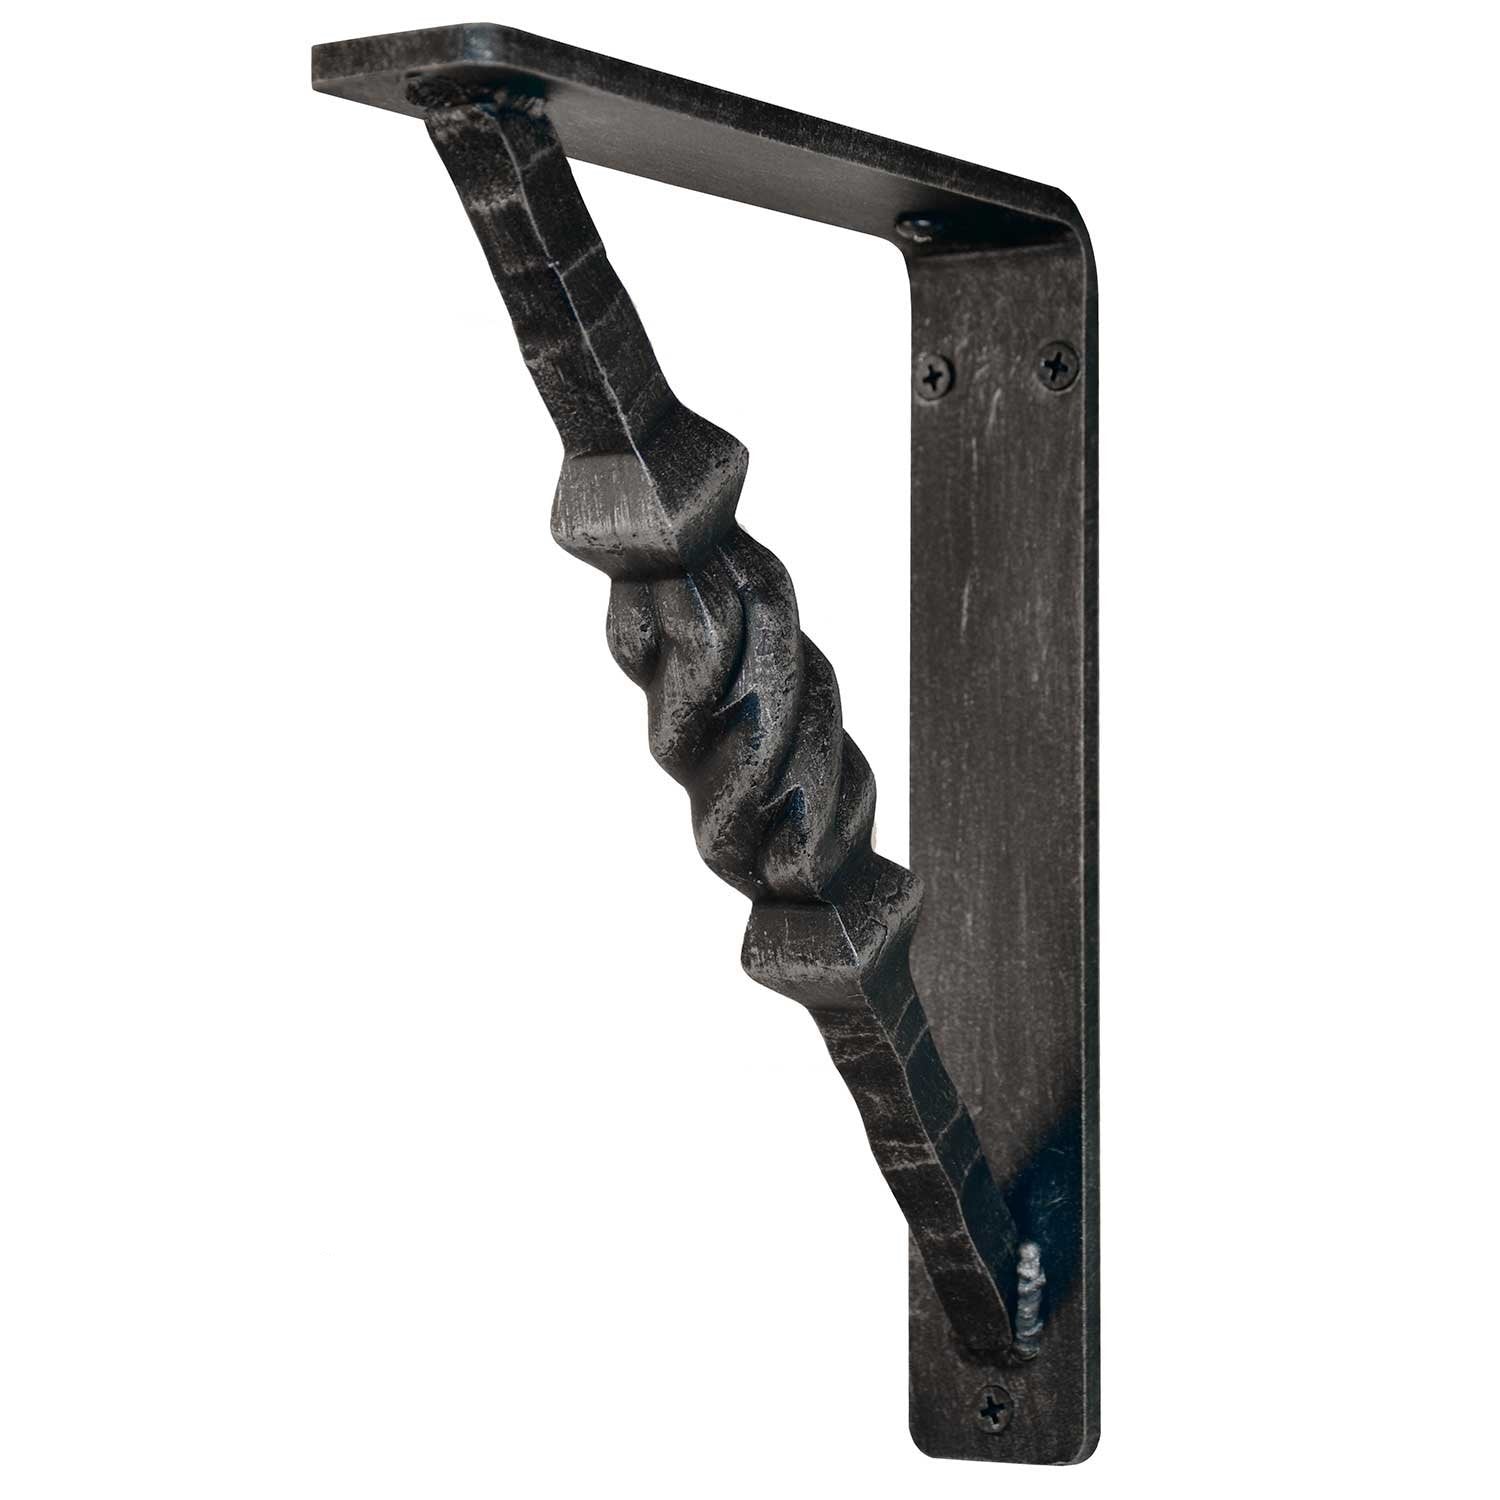 Pictured here is our 1.5inch wide Victorian Style Iron Corbel with a timeless hand-forged center support